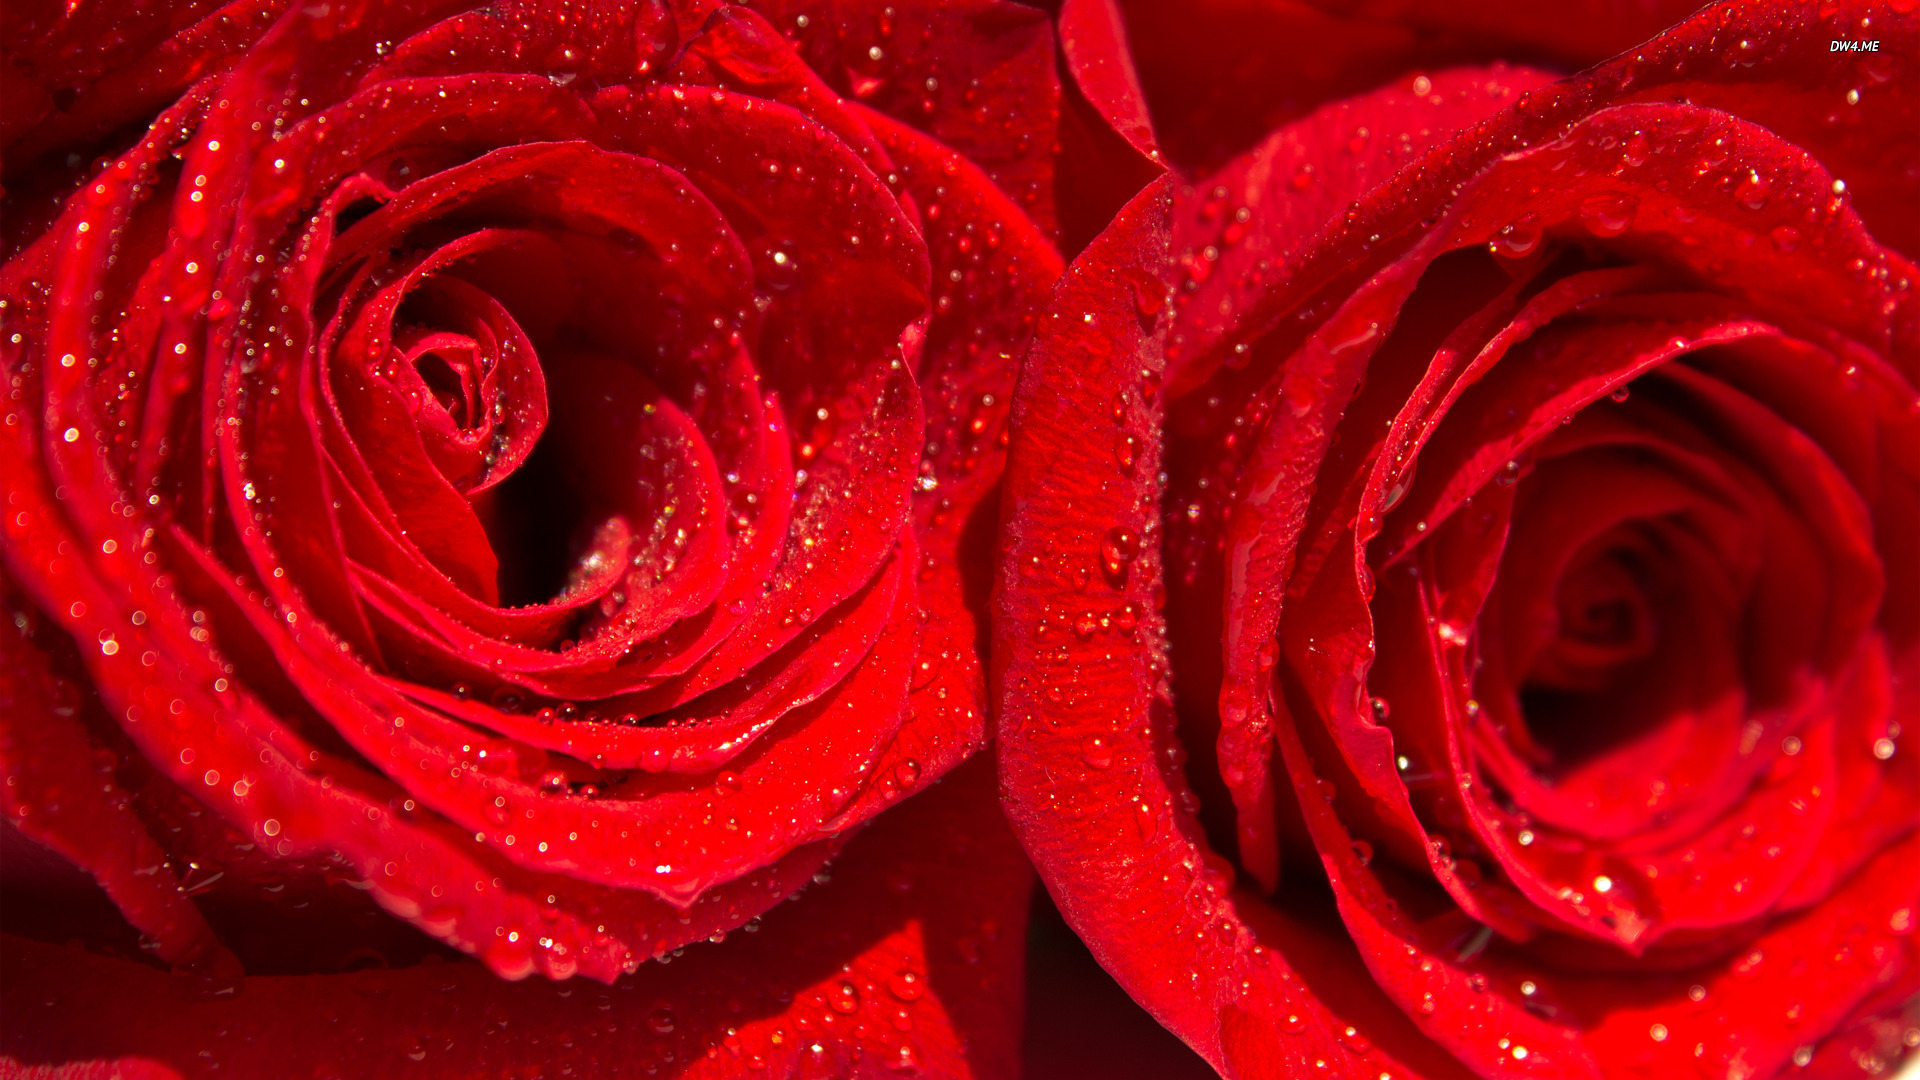 Water drops on red roses wallpaper   918982